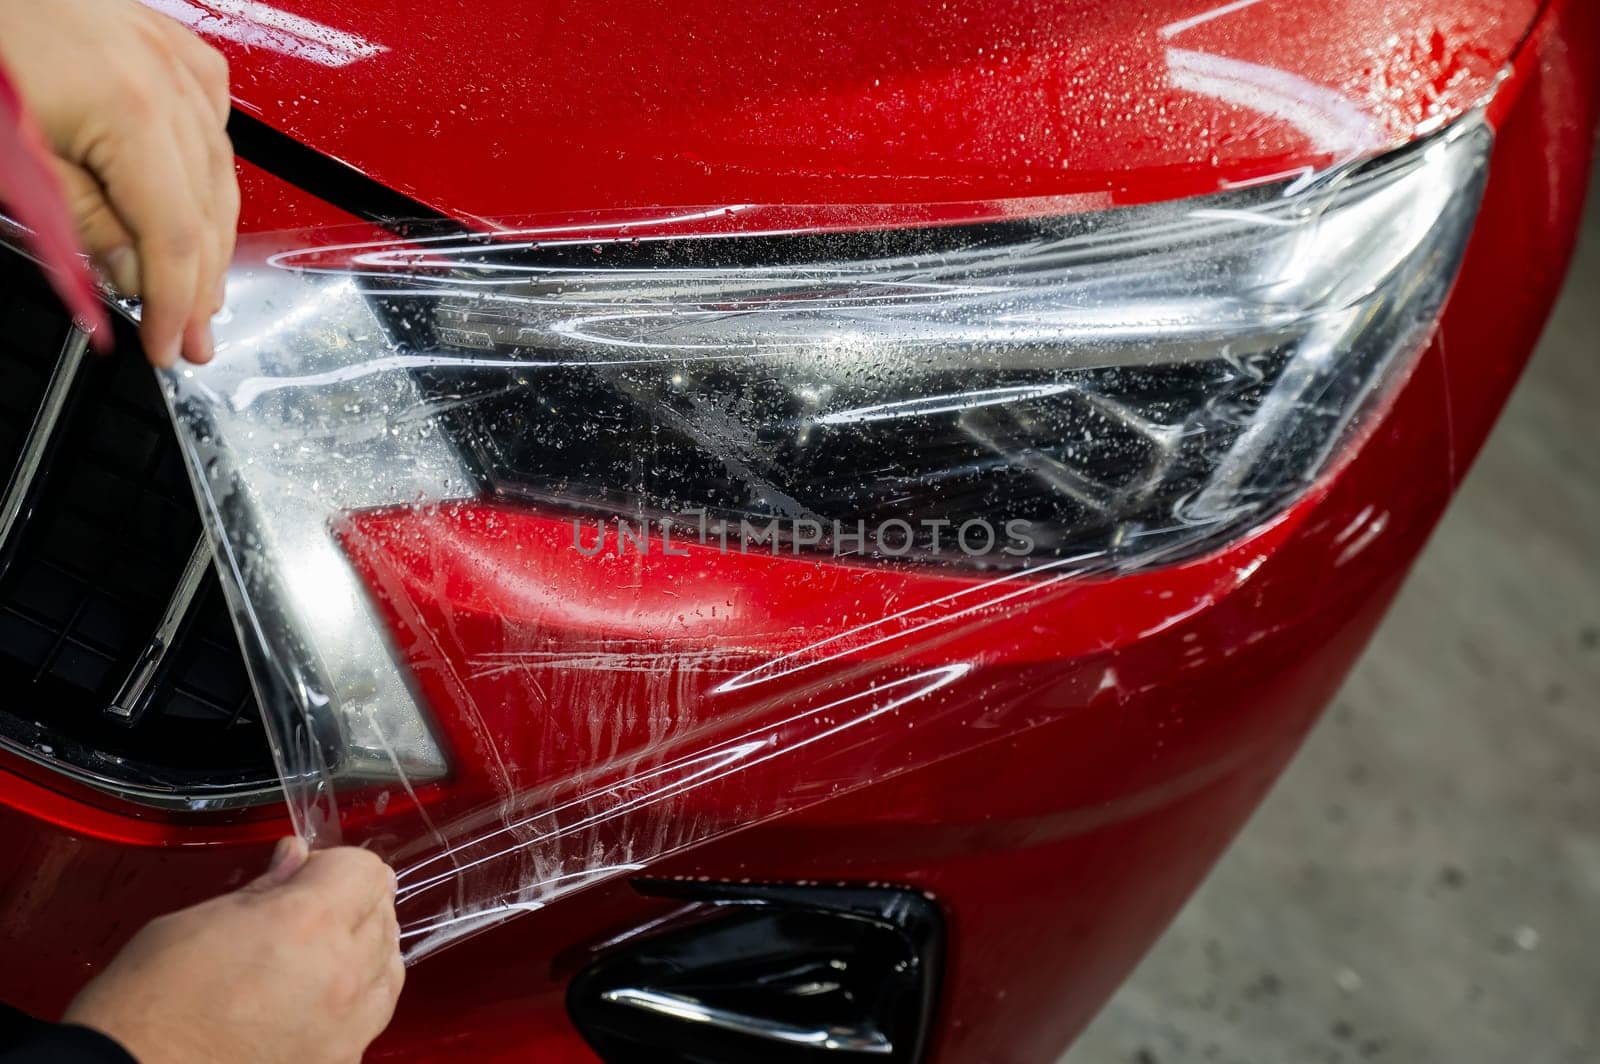 The master applies vinyl film to the headlight of a red car